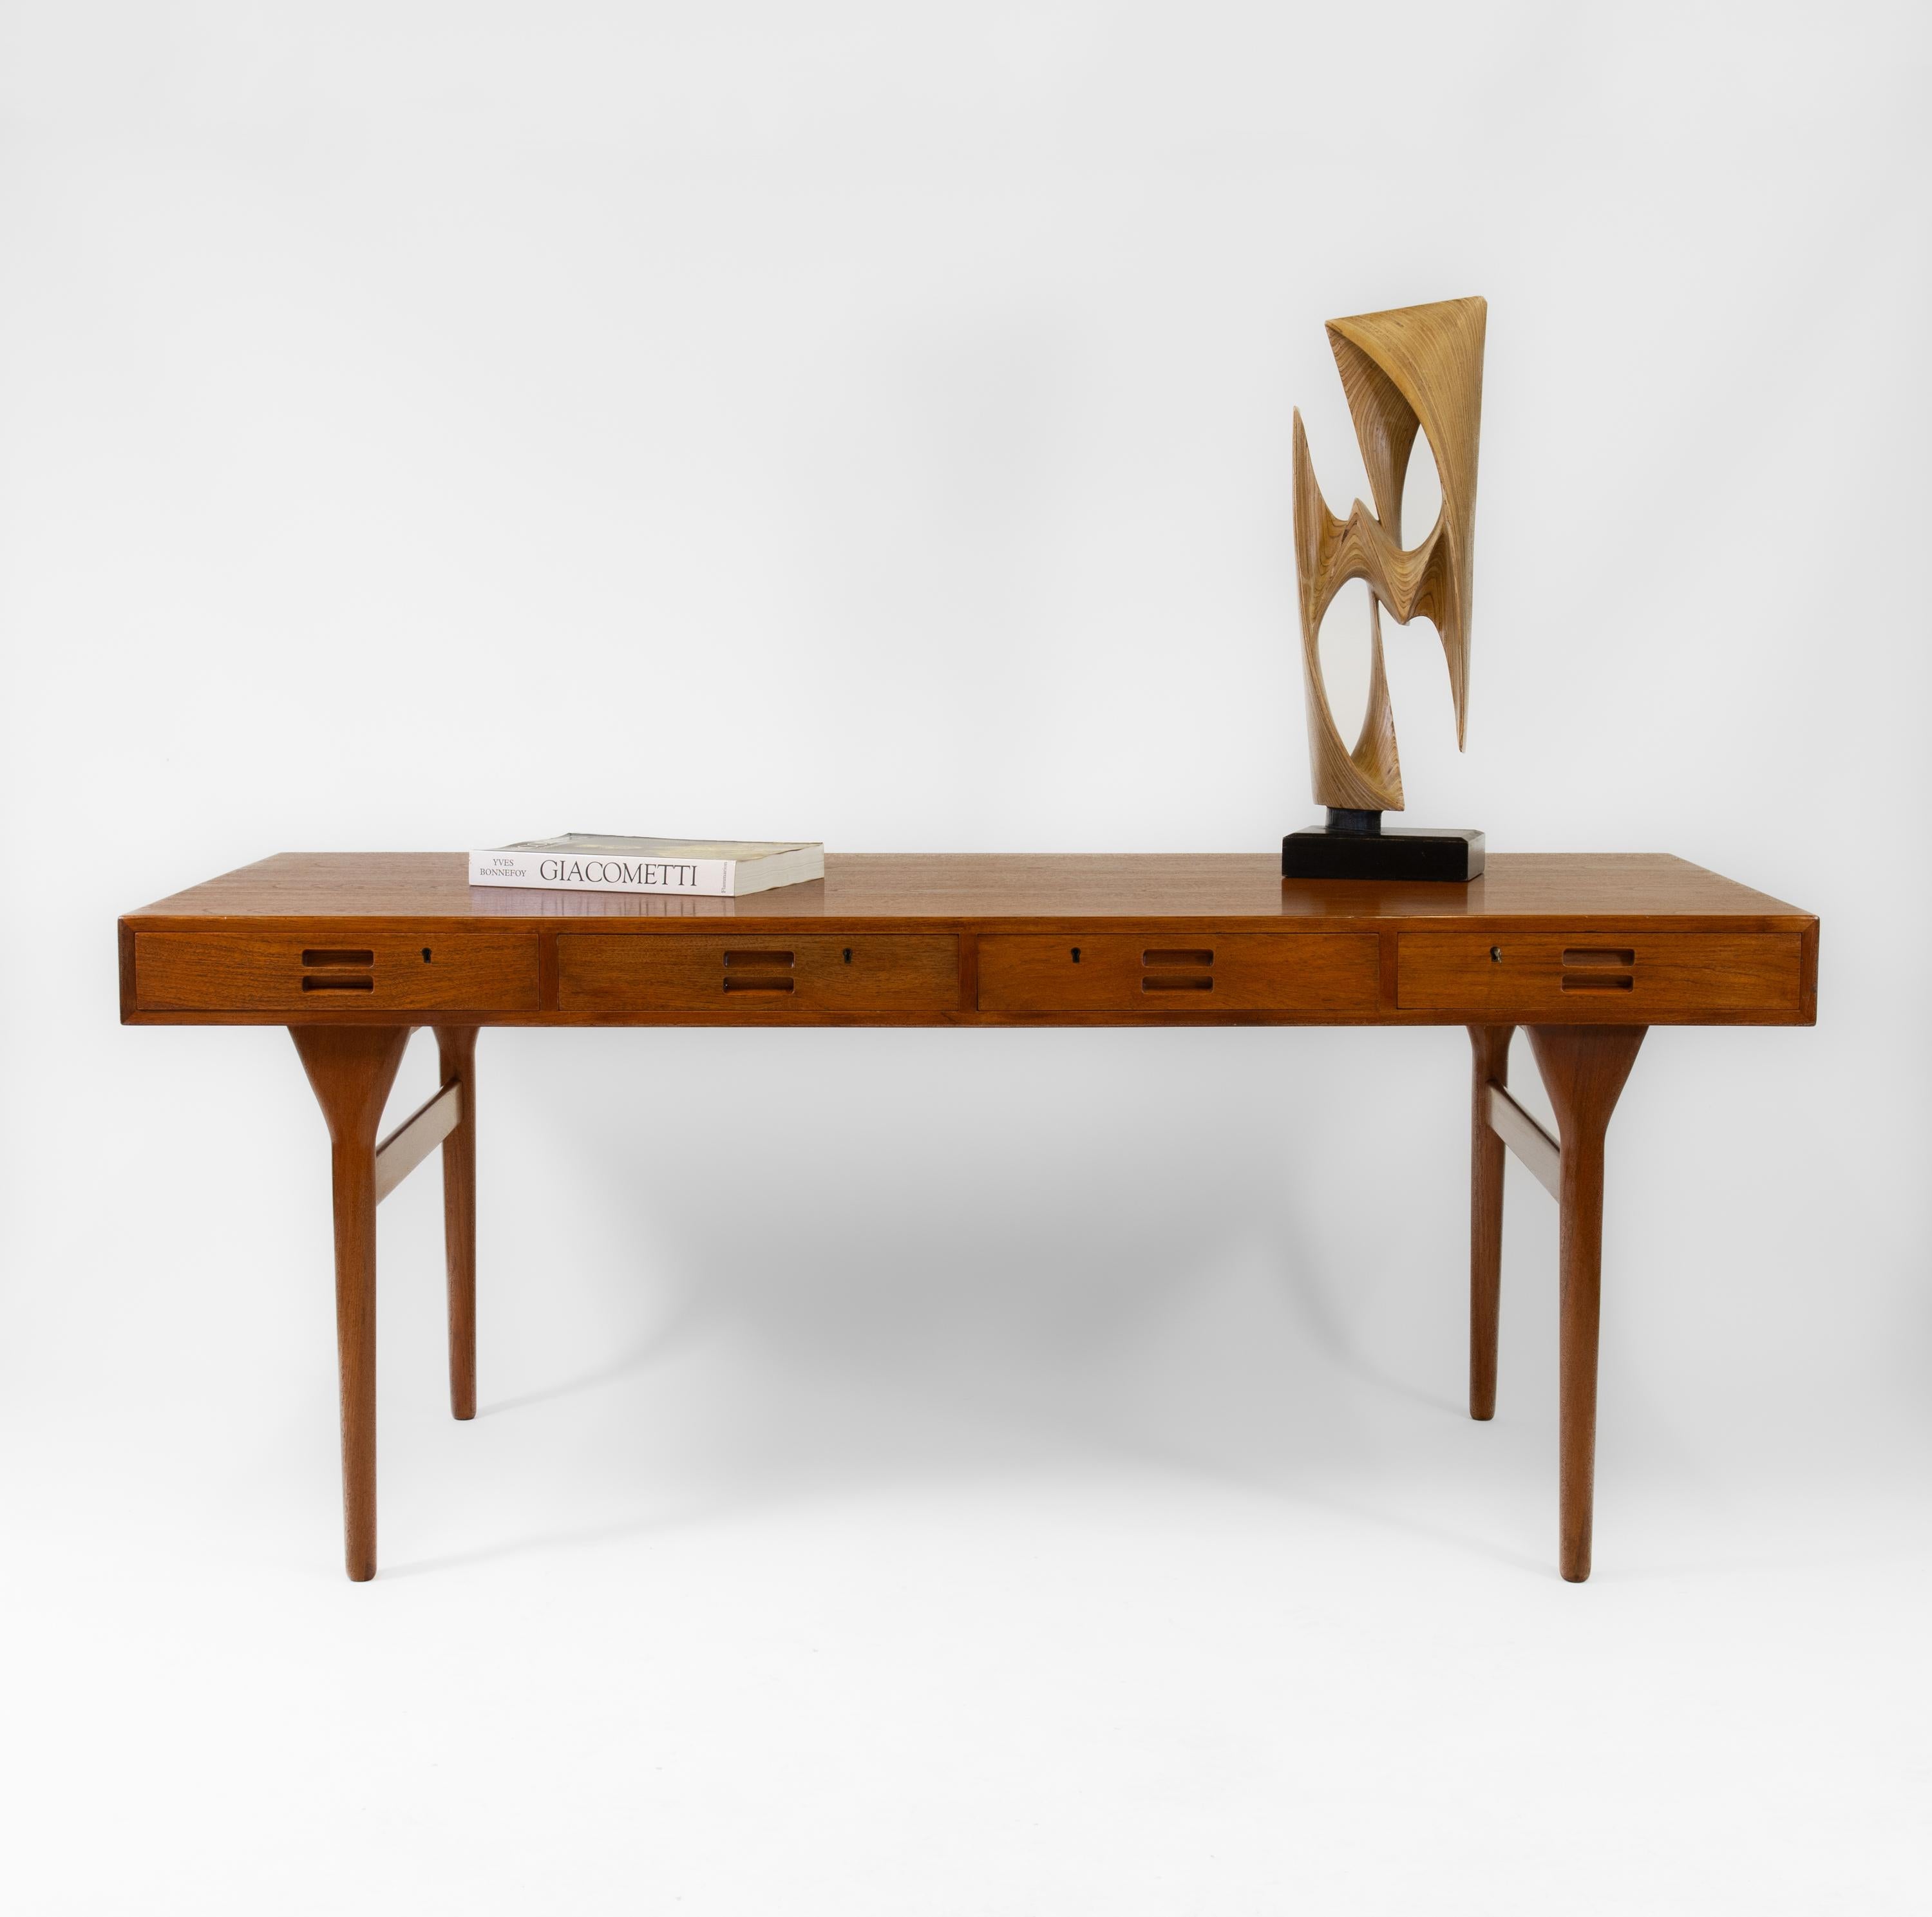 A super sleek iconic Danish mid century teak four drawer desk designed by Nanna Ditzel. Circa late 1950's.

Affectionately known later as the cassette-shape desk, it has been re-finished by hand, still retaining a few light authentic marks to